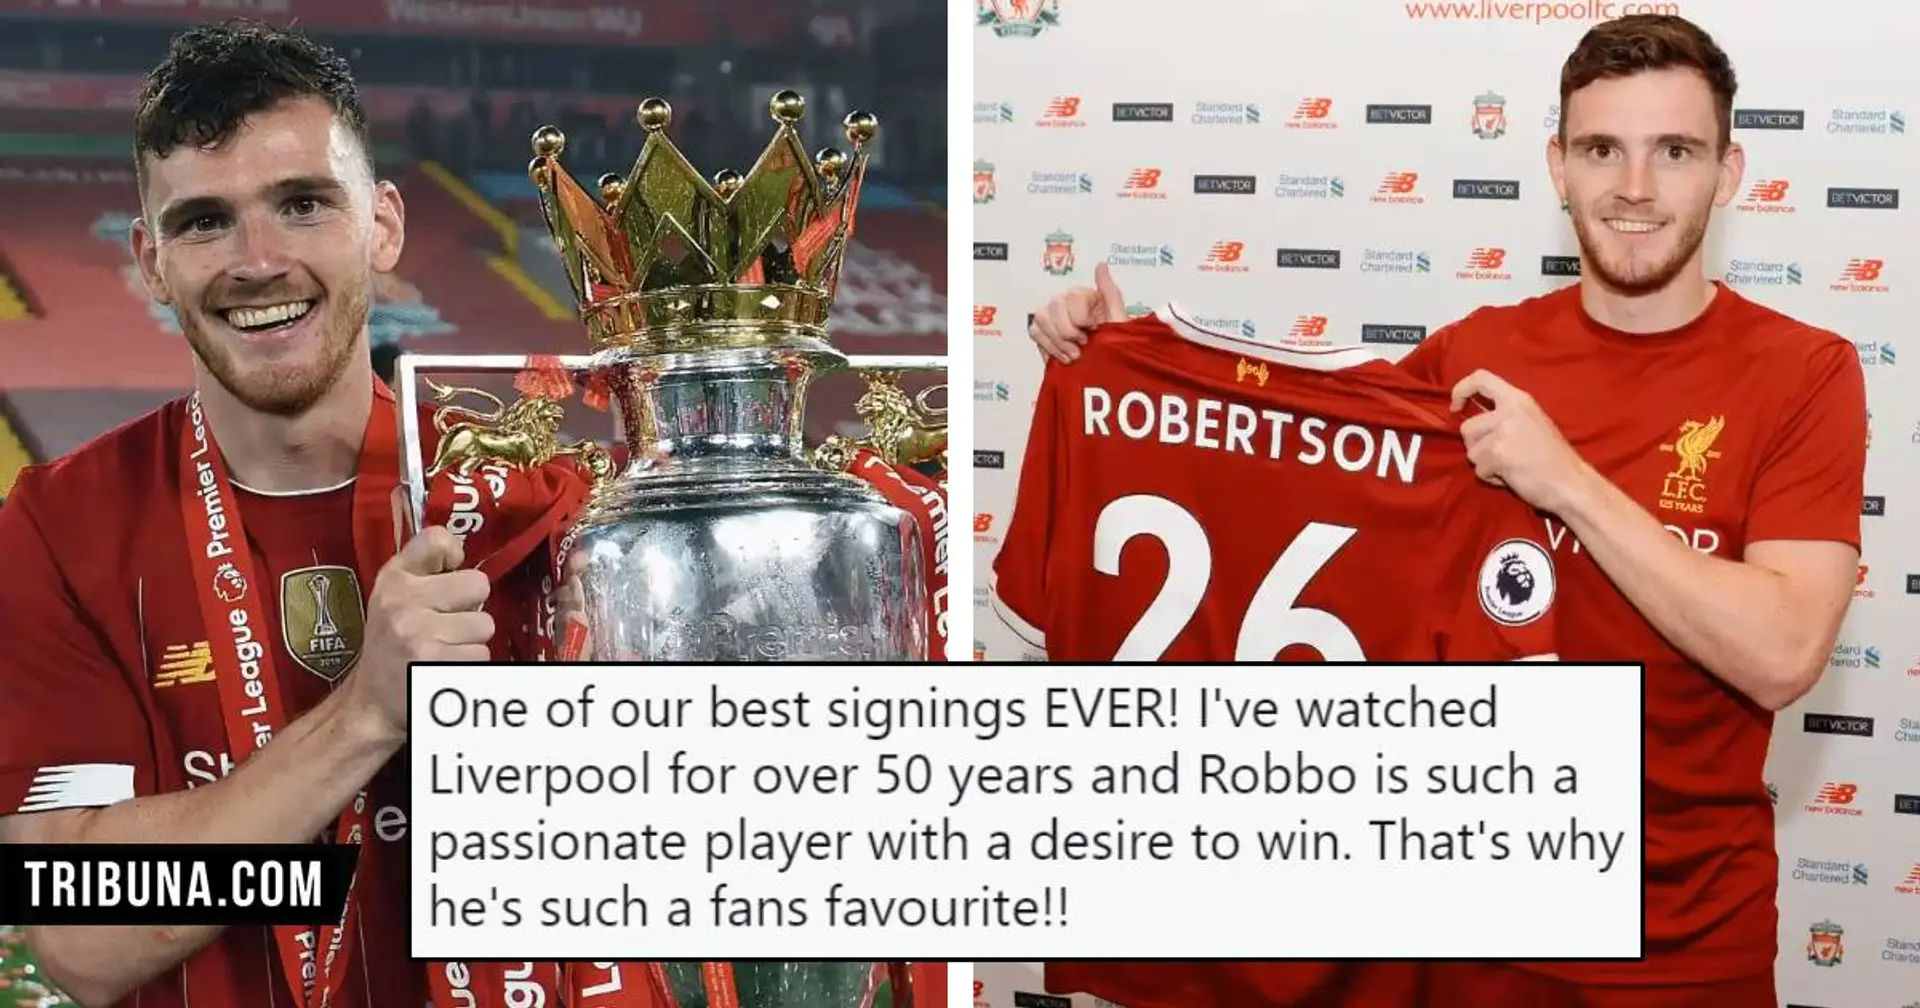 'One of the best bargains ever': On this day 4 years ago, Robbo made his Reds debut - fans celebrate left-back's career